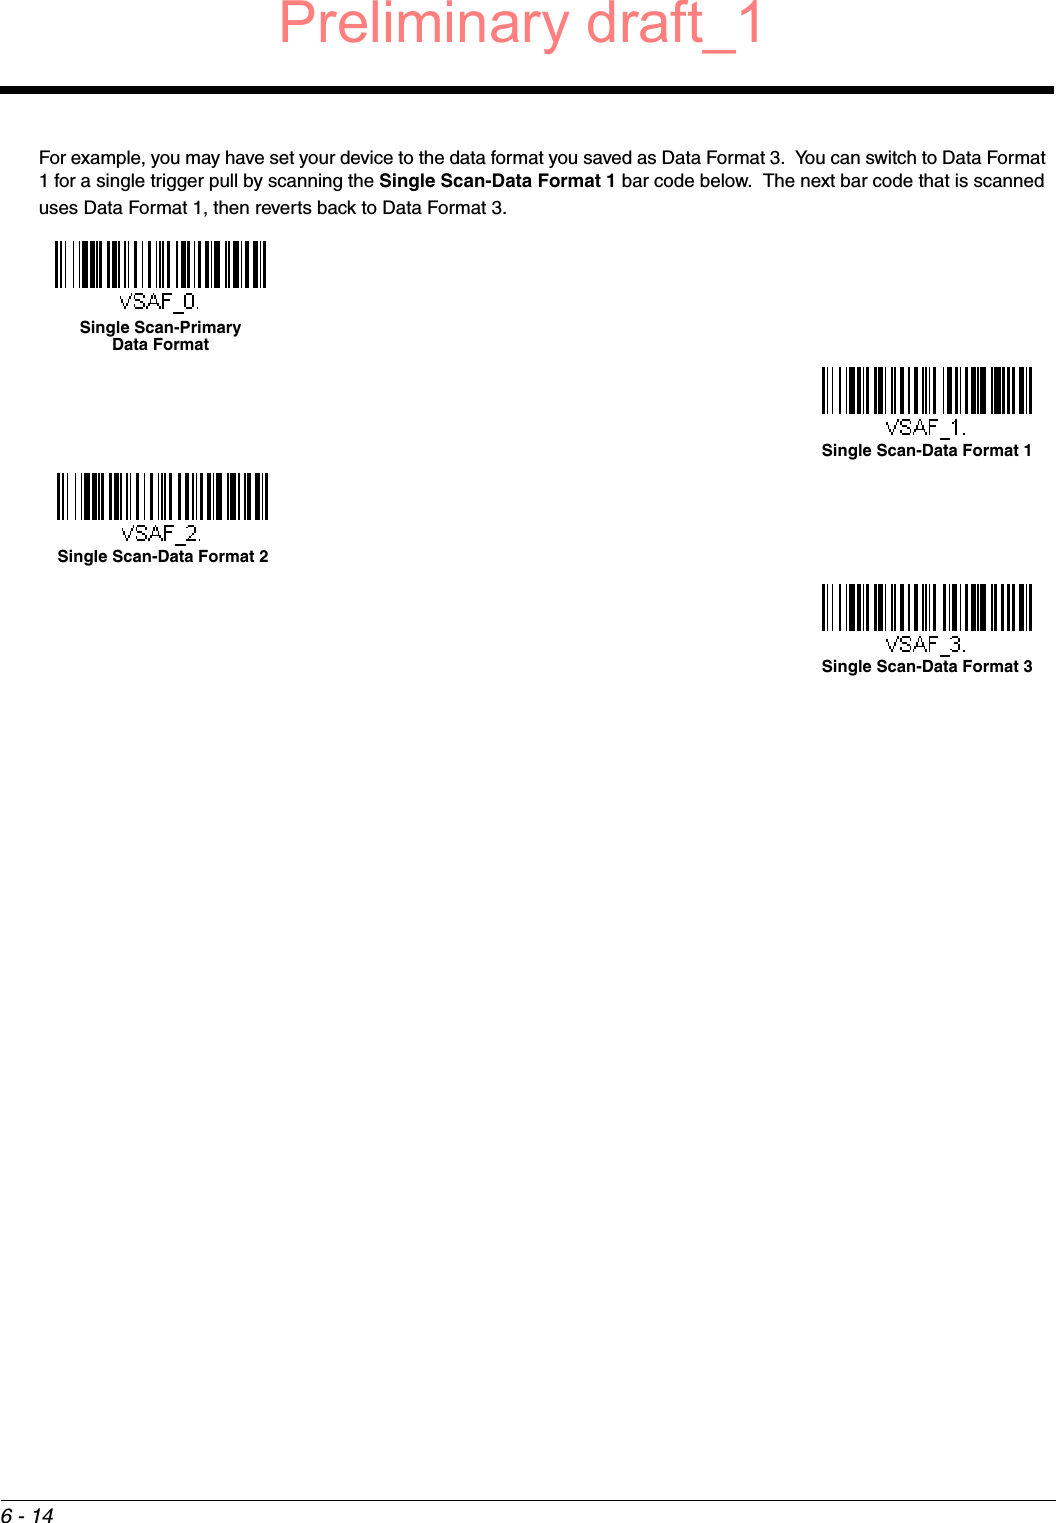 6 - 14For example, you may have set your device to the data format you saved as Data Format 3.  You can switch to Data Format 1 for a single trigger pull by scanning the Single Scan-Data Format 1 bar code below.  The next bar code that is scanned uses Data Format 1, then reverts back to Data Format 3. Single Scan-Primary Data FormatSingle Scan-Data Format 1Single Scan-Data Format 2Single Scan-Data Format 3Preliminary draft_1